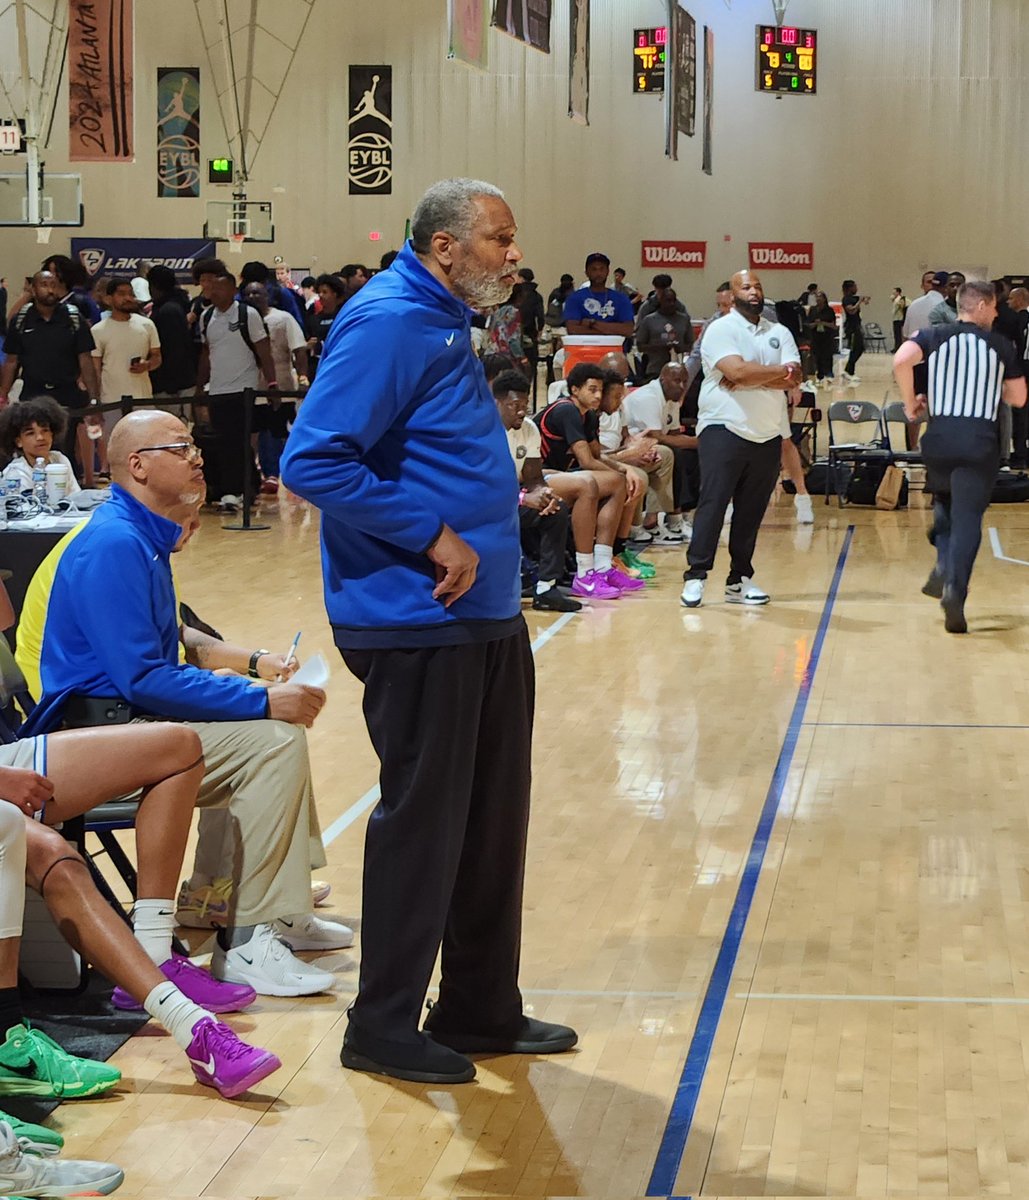 Legends aren't born. They are molded through the test of time - through fire 🔥 & ice 🧊. Boo Williams (coaching AAU since the 80s) is one of those dudes! His Boo Williams team alums include future NBA players Allen Iverson, Alonzo Mourning, JR Reid & JJ Reddick. What a legacy!